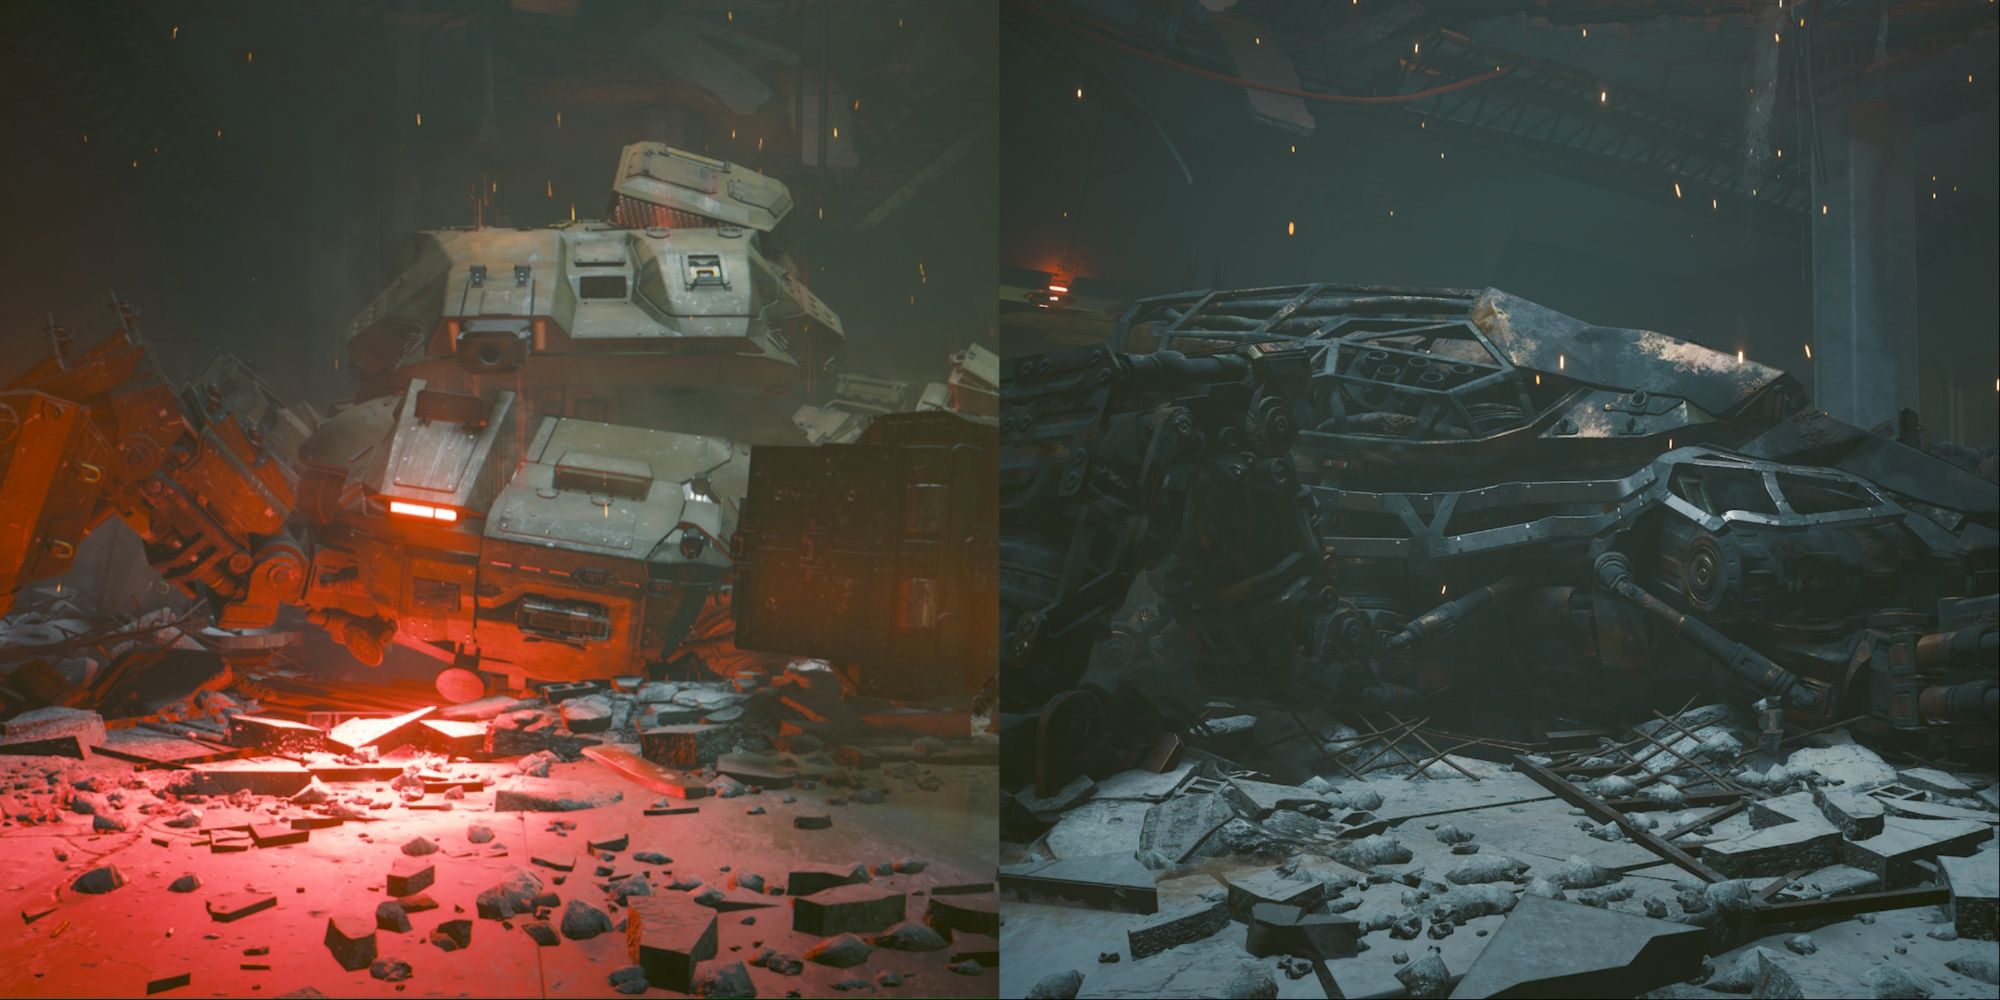 Cyberpunk 2077 Chimera Boss Featured Split Image Image Of Chimera In Perfect Condition and Another Of It Destroyed